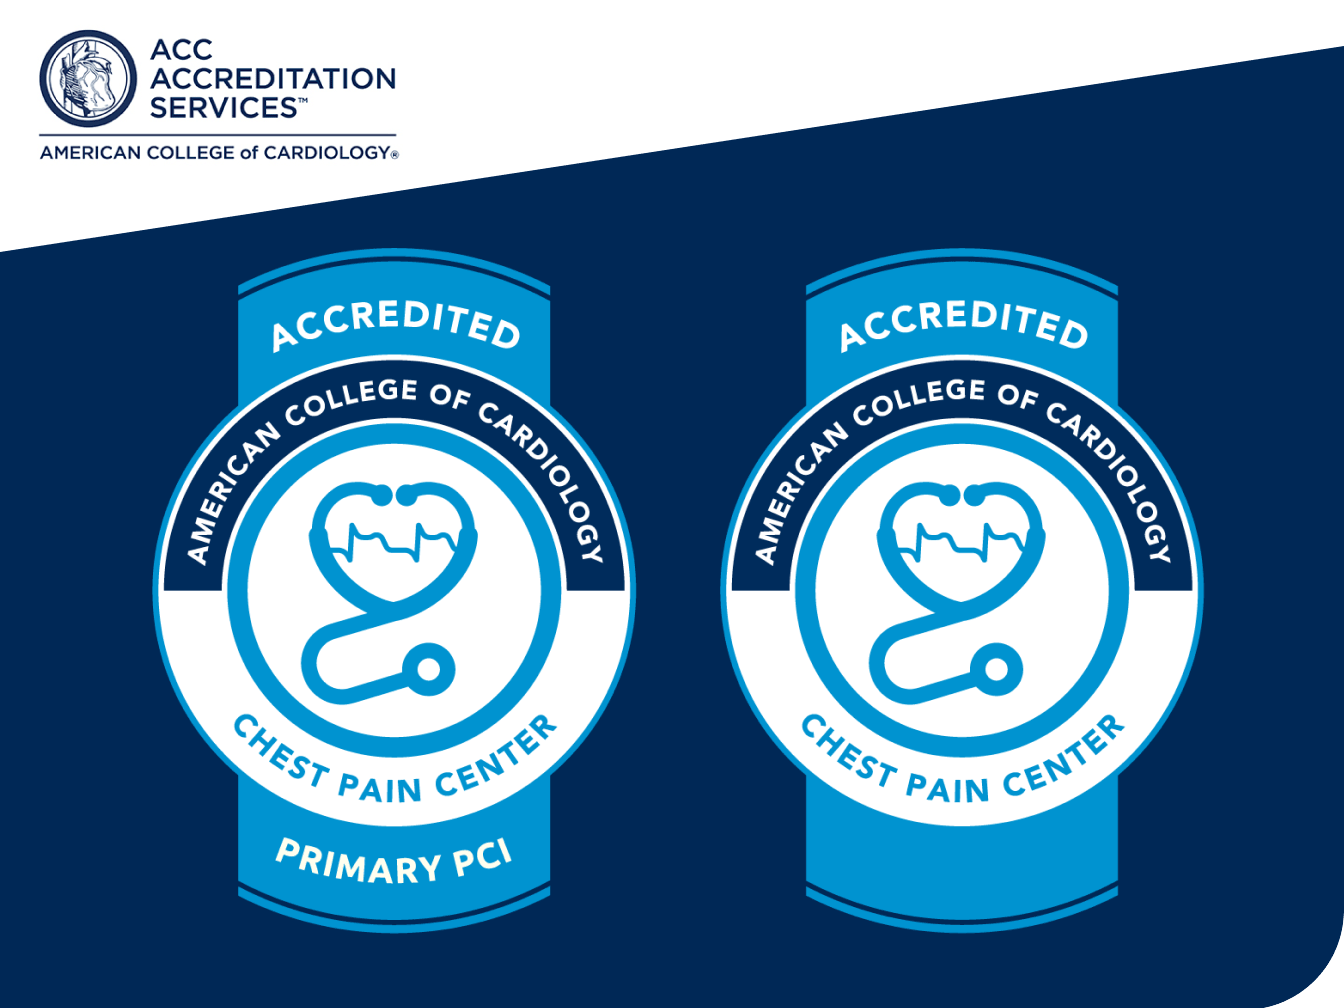 ACC Accreditation Services | American College of Cardiology